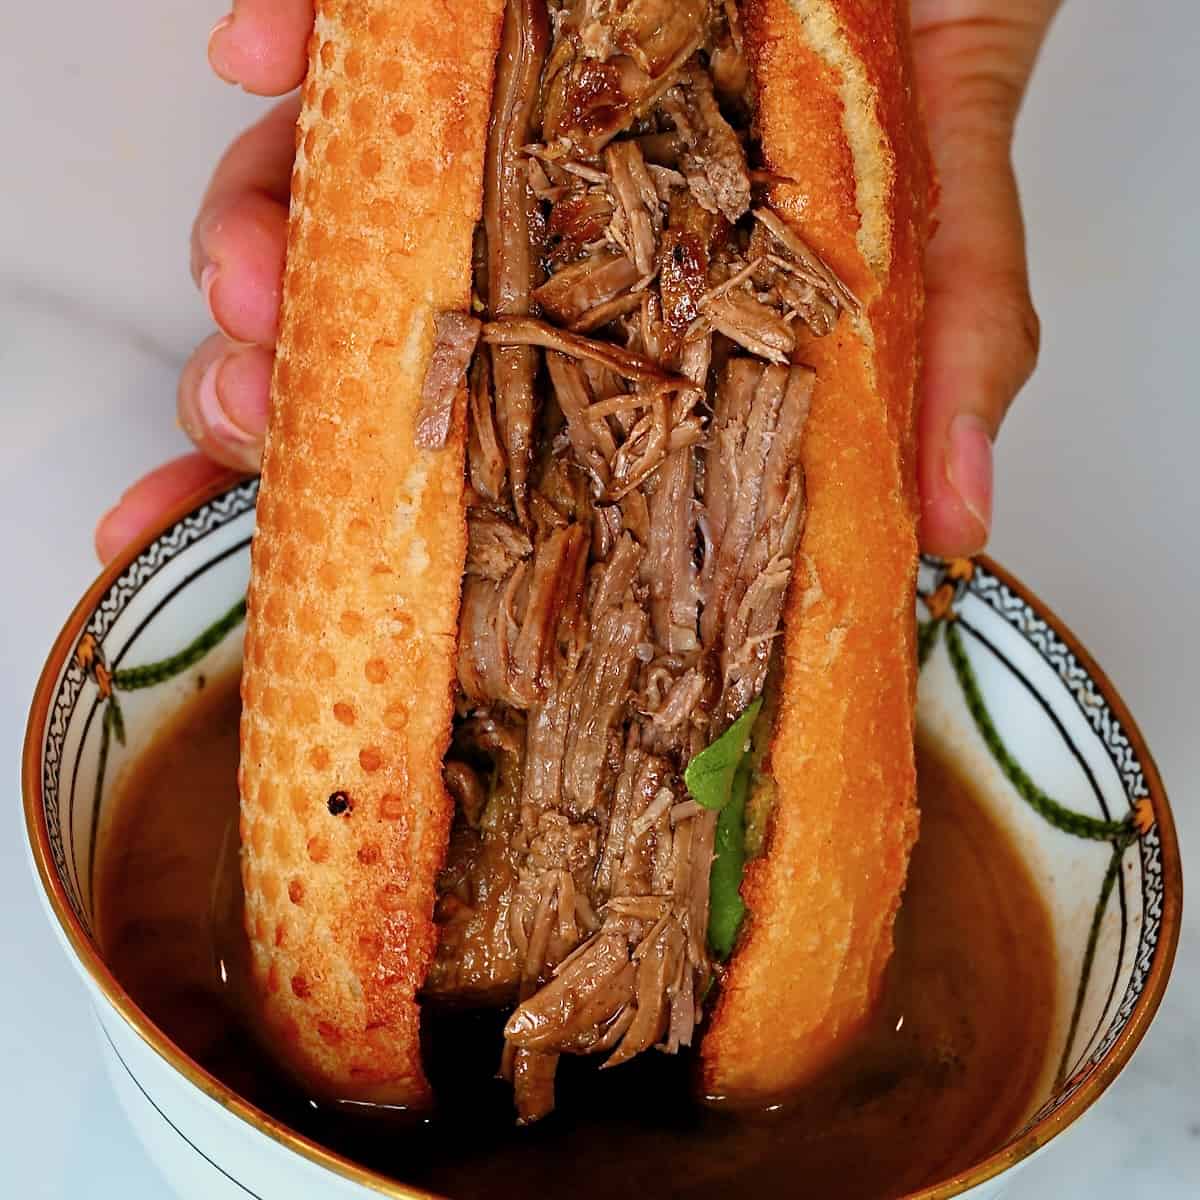 French dip sandwich being dipped into sauce